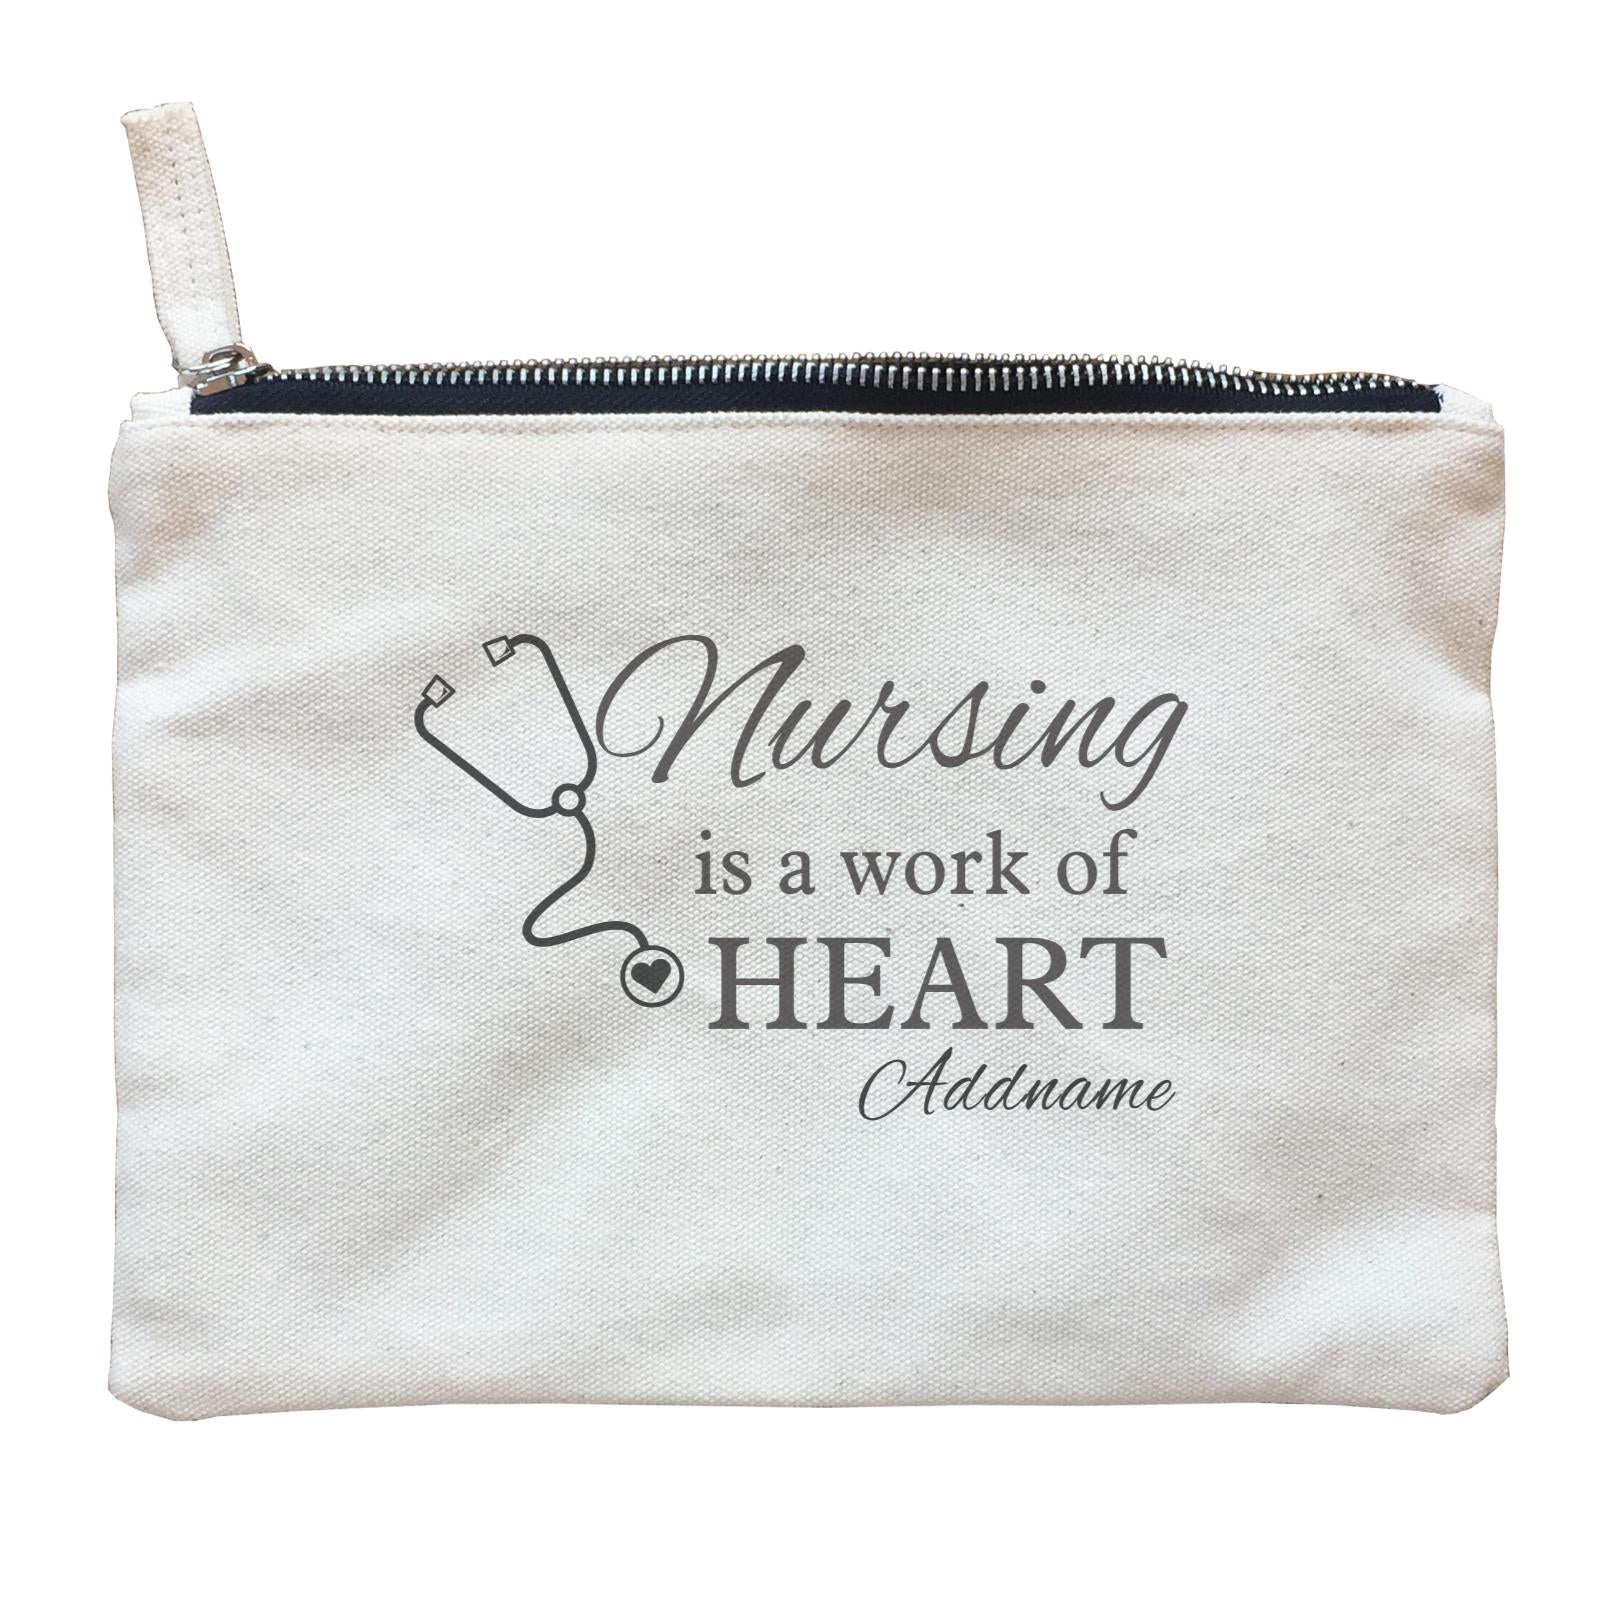 Nurse QuotesStethoscope Icon Is A Work Of Heart Addname Zipper Pouch